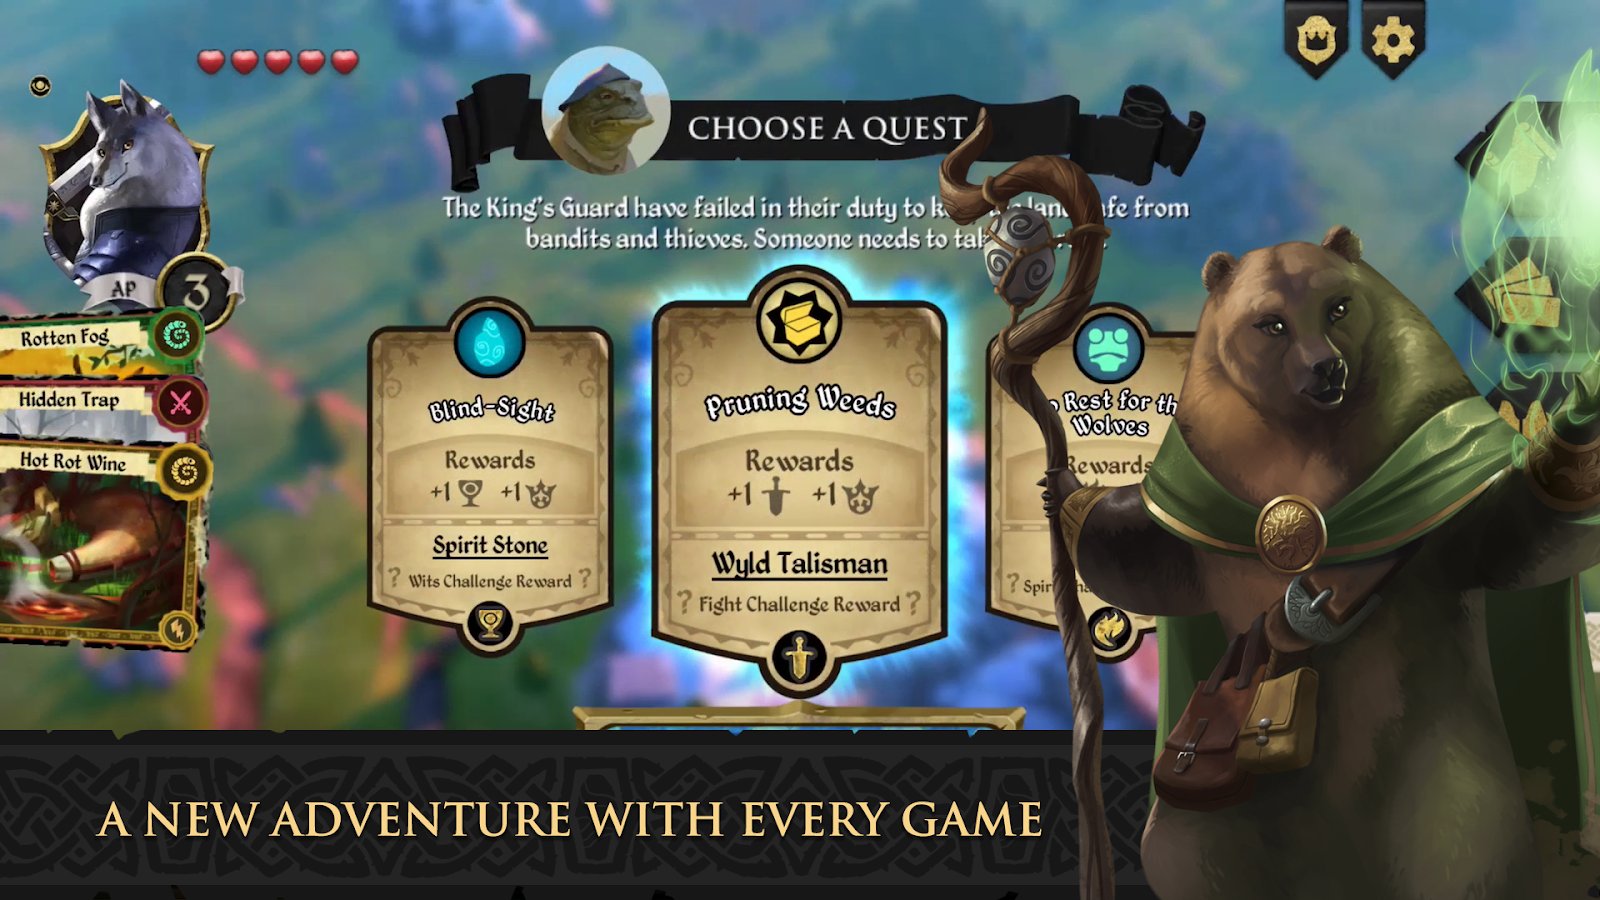 free download armello physical board game